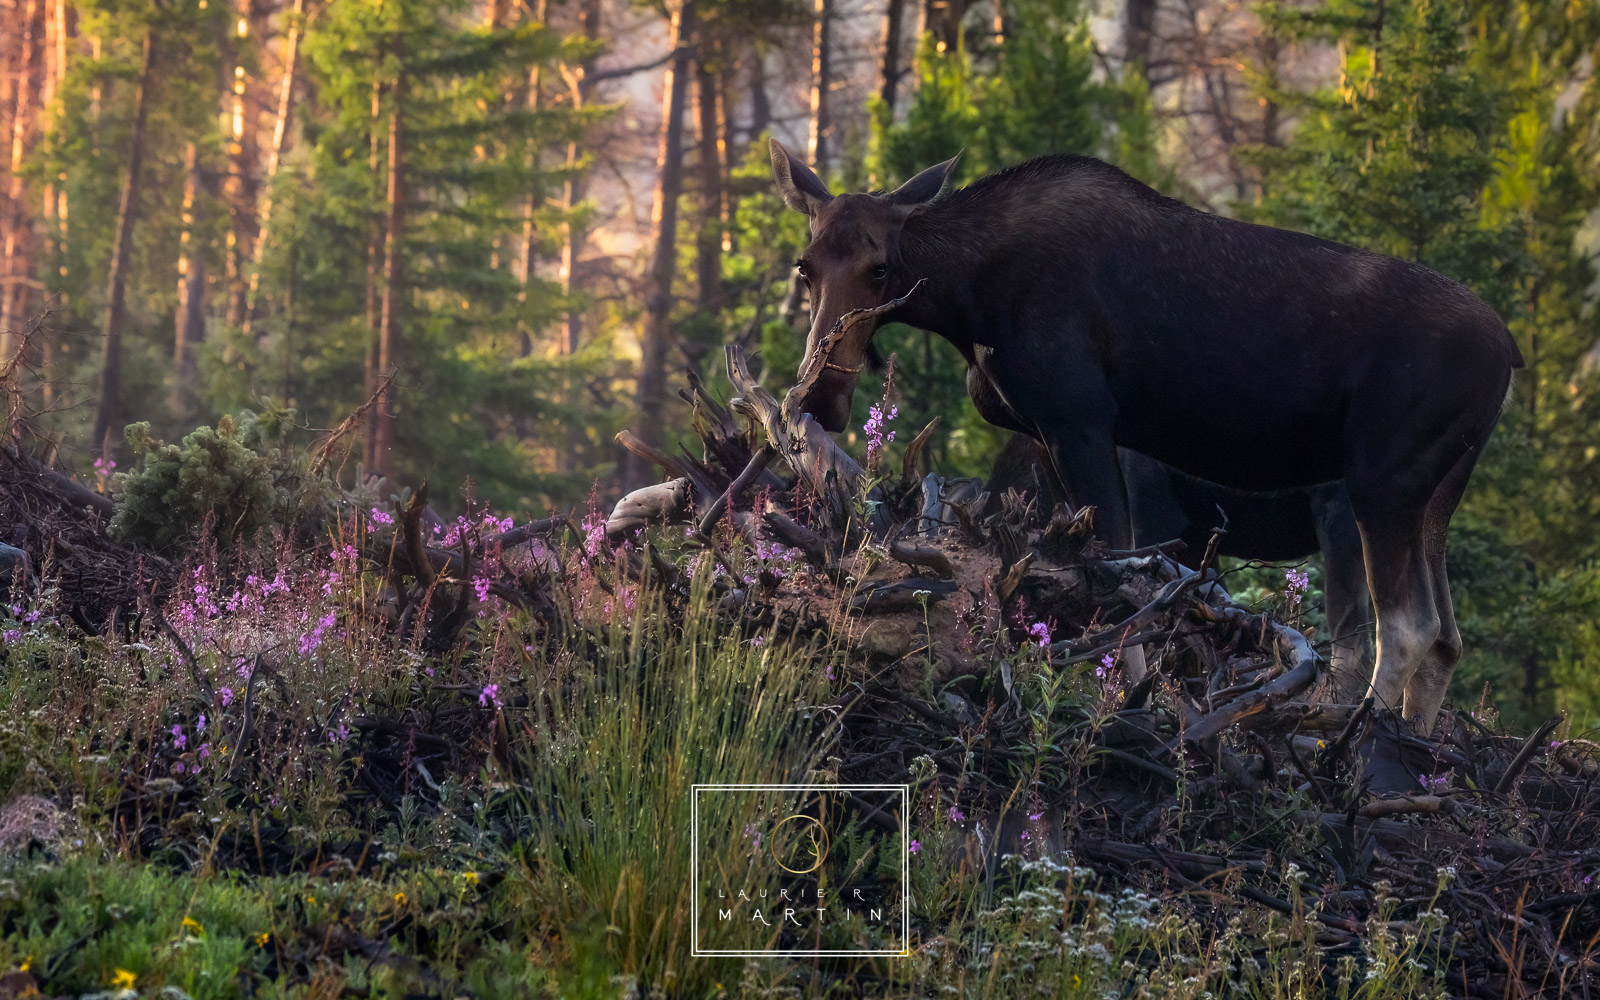 What a morning watching these two feed on purple fireweed in the soft filtered morning light. They did not seem startled with me and kept grazing quietly.